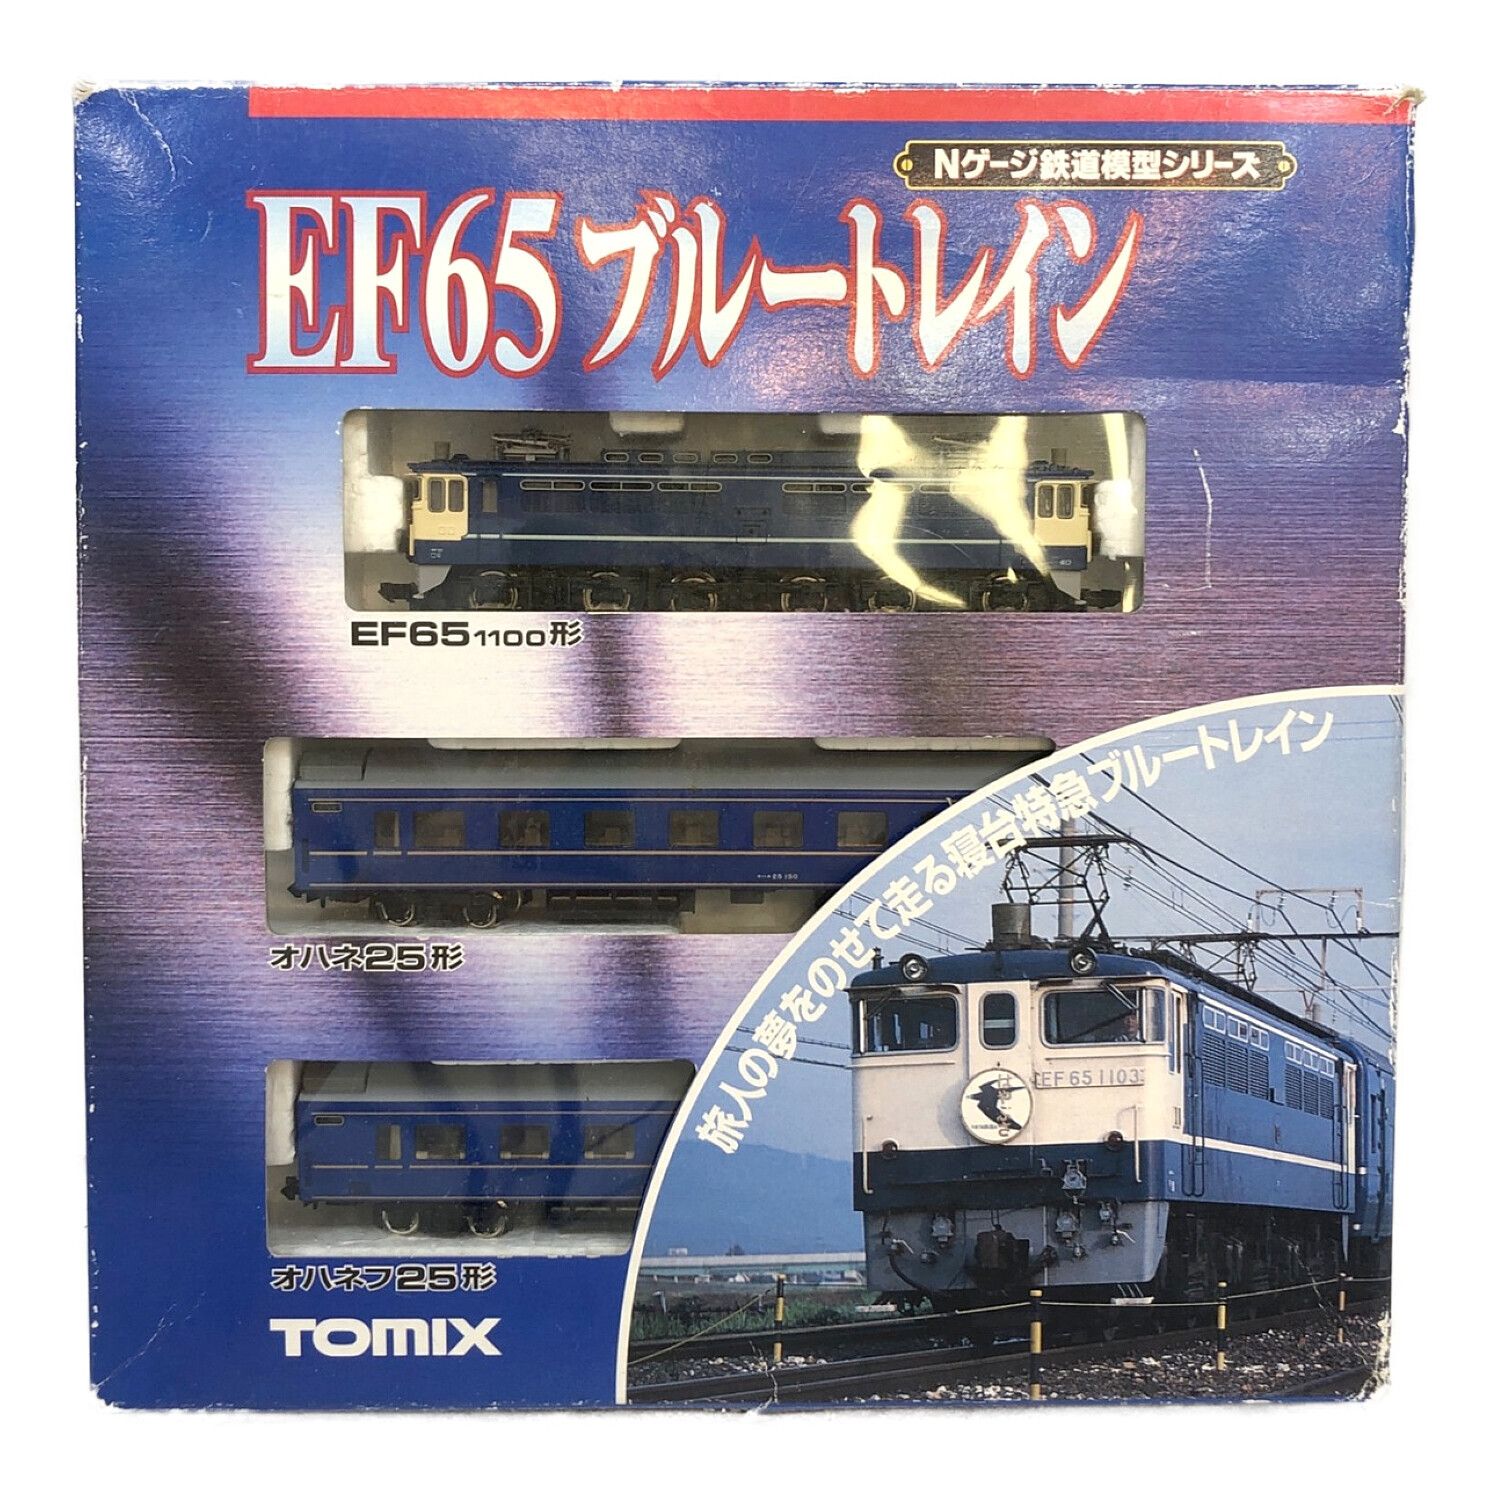 Nゲージ TOMIX 限定品 92974 EF65 2両セット！ - ホビー・楽器・アート